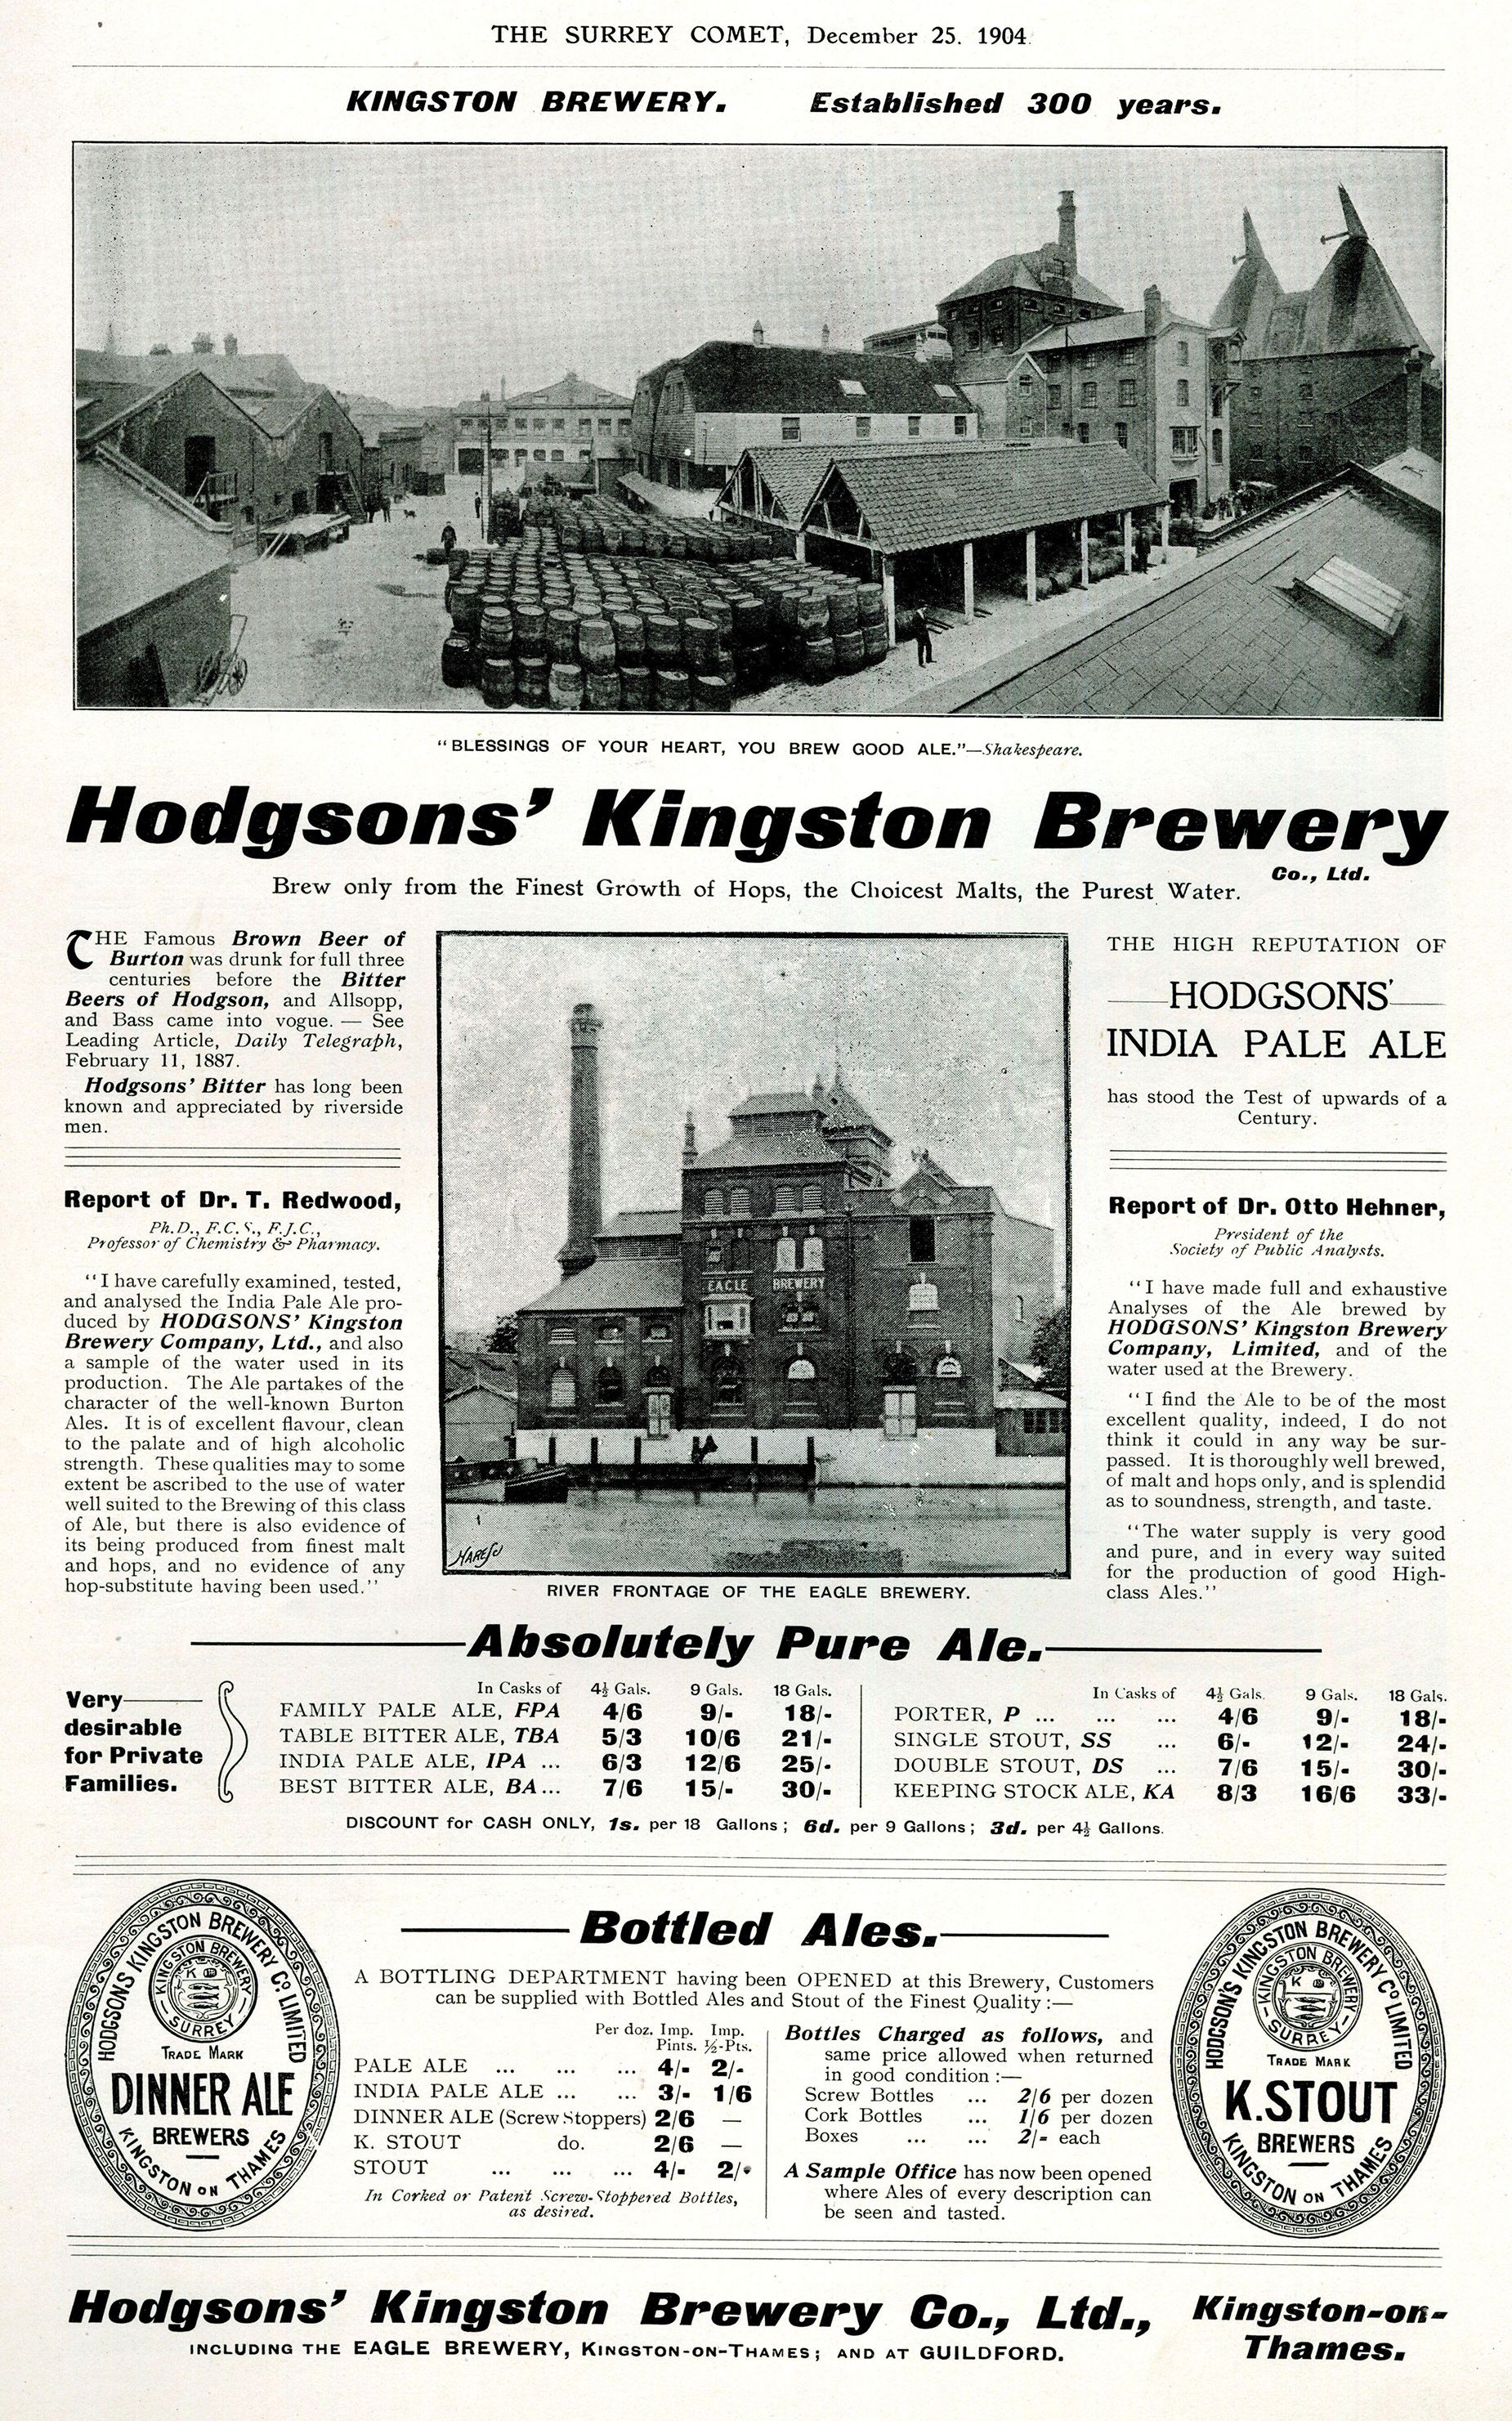 A 1904 ad in The Surrey Comet that references Hodgson's India Pale Ale.